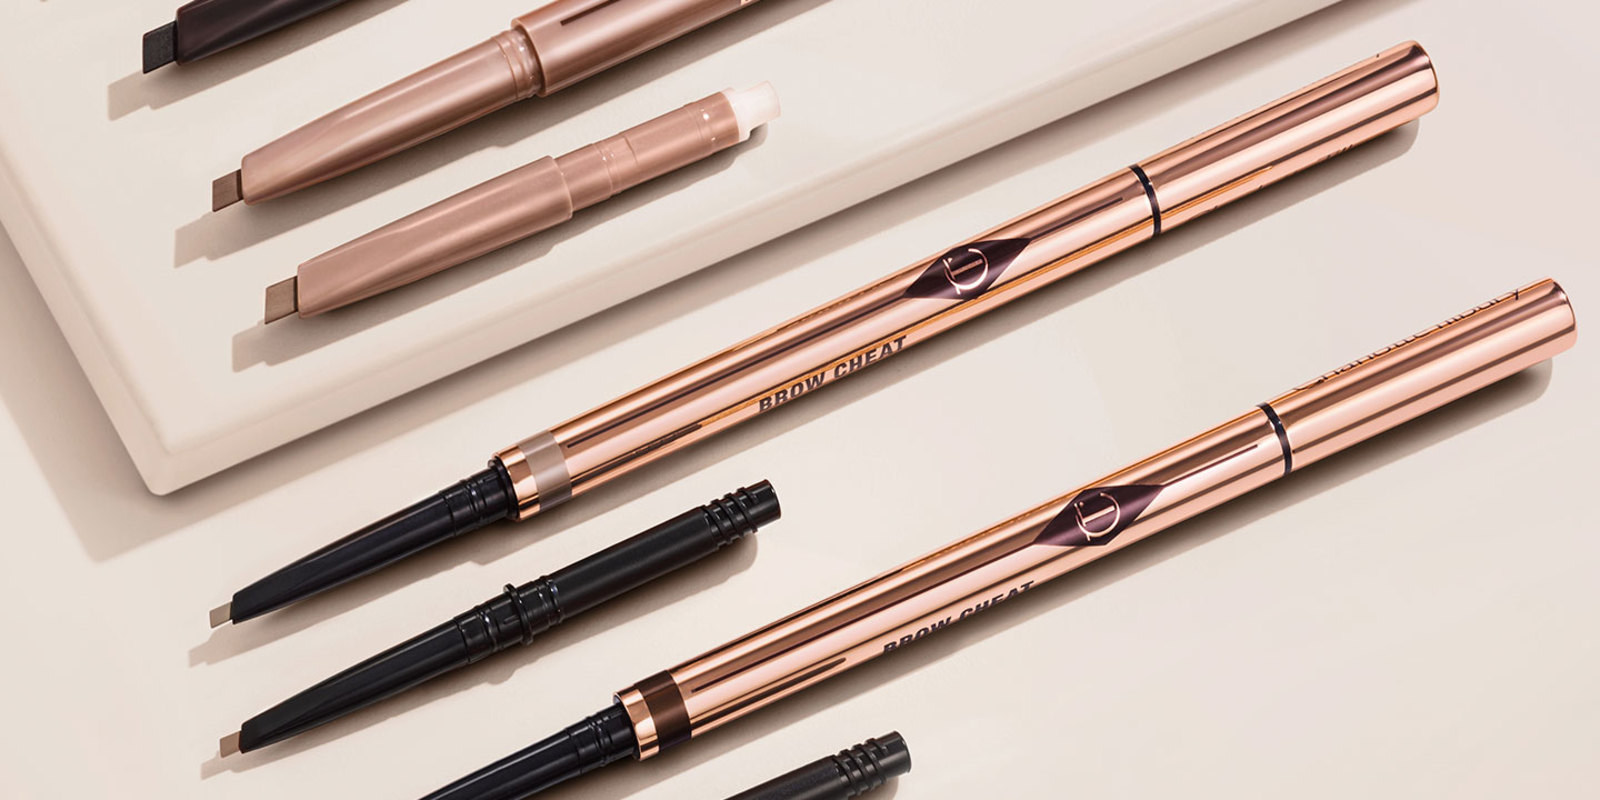 Eyebrow pencils with their refills in sleek, gold-coloured packaging.